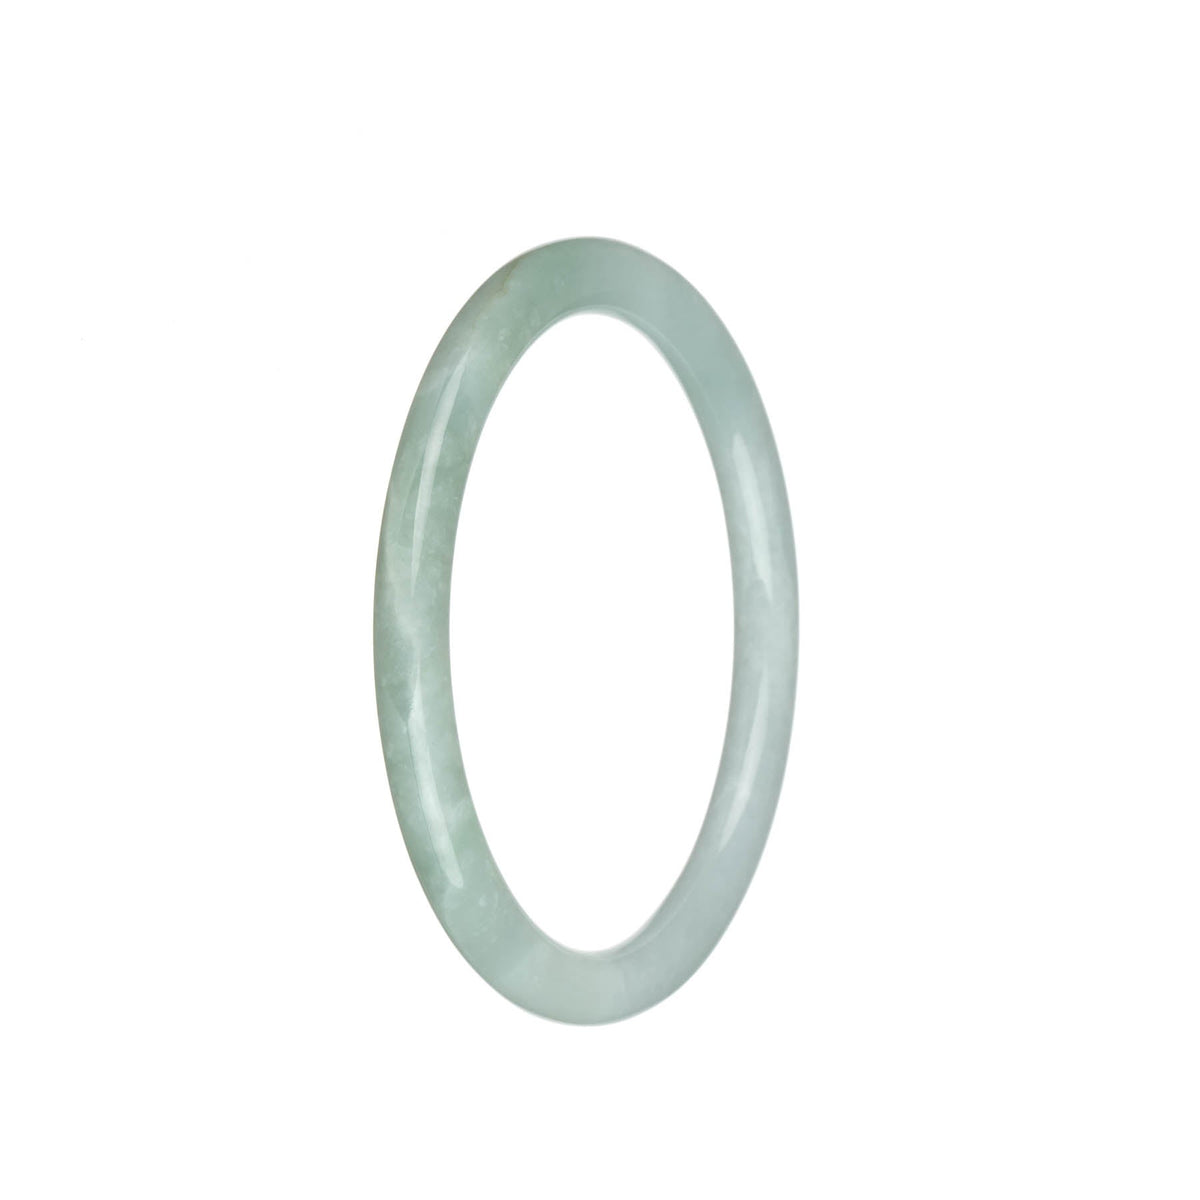 Authentic Grade A White with Pale Green Burma Jade Bracelet - 61mm Petite Round